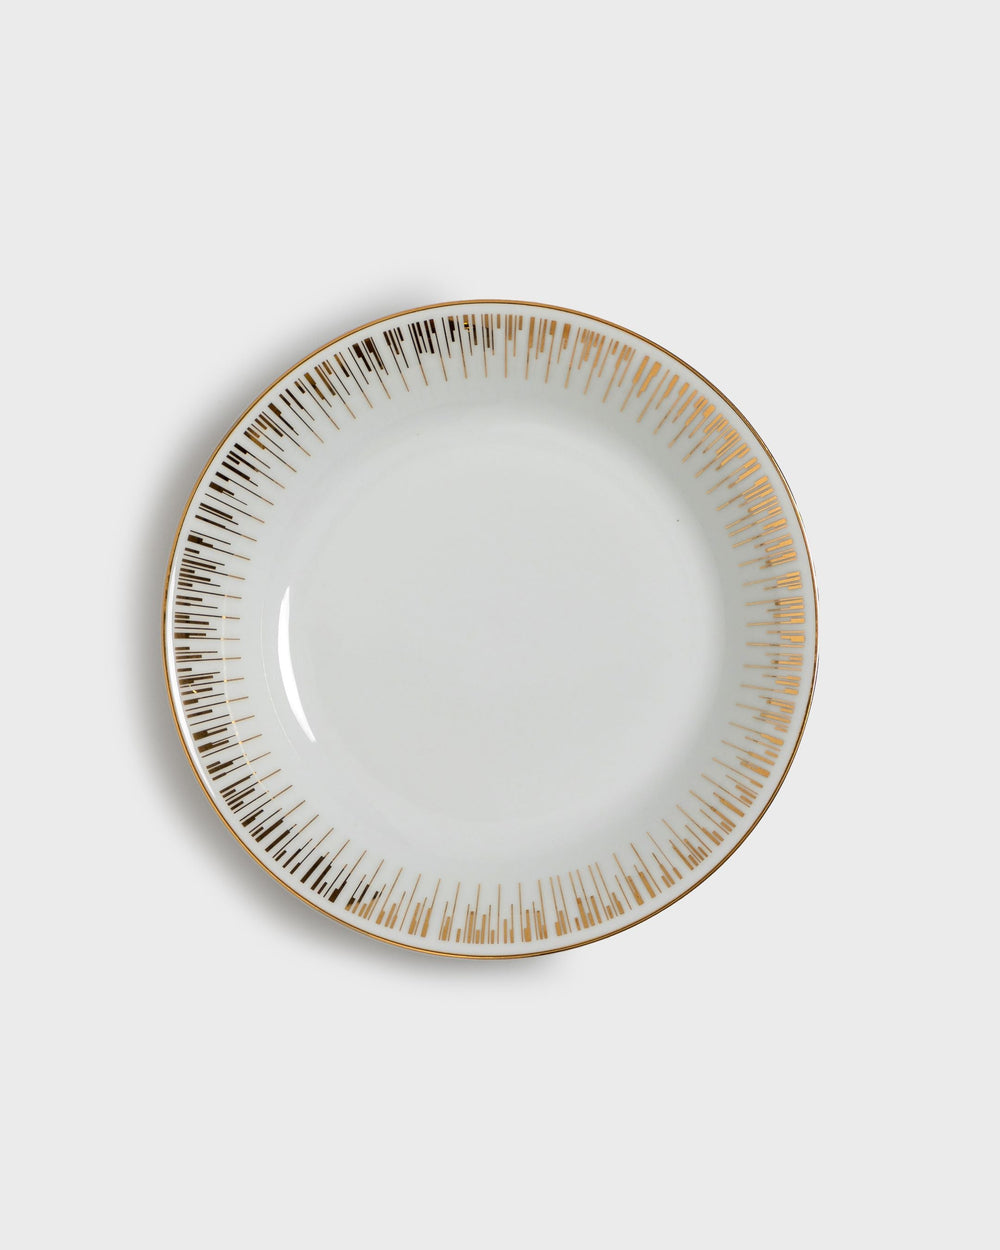 Tania Bulhoes Soup Plate Astro